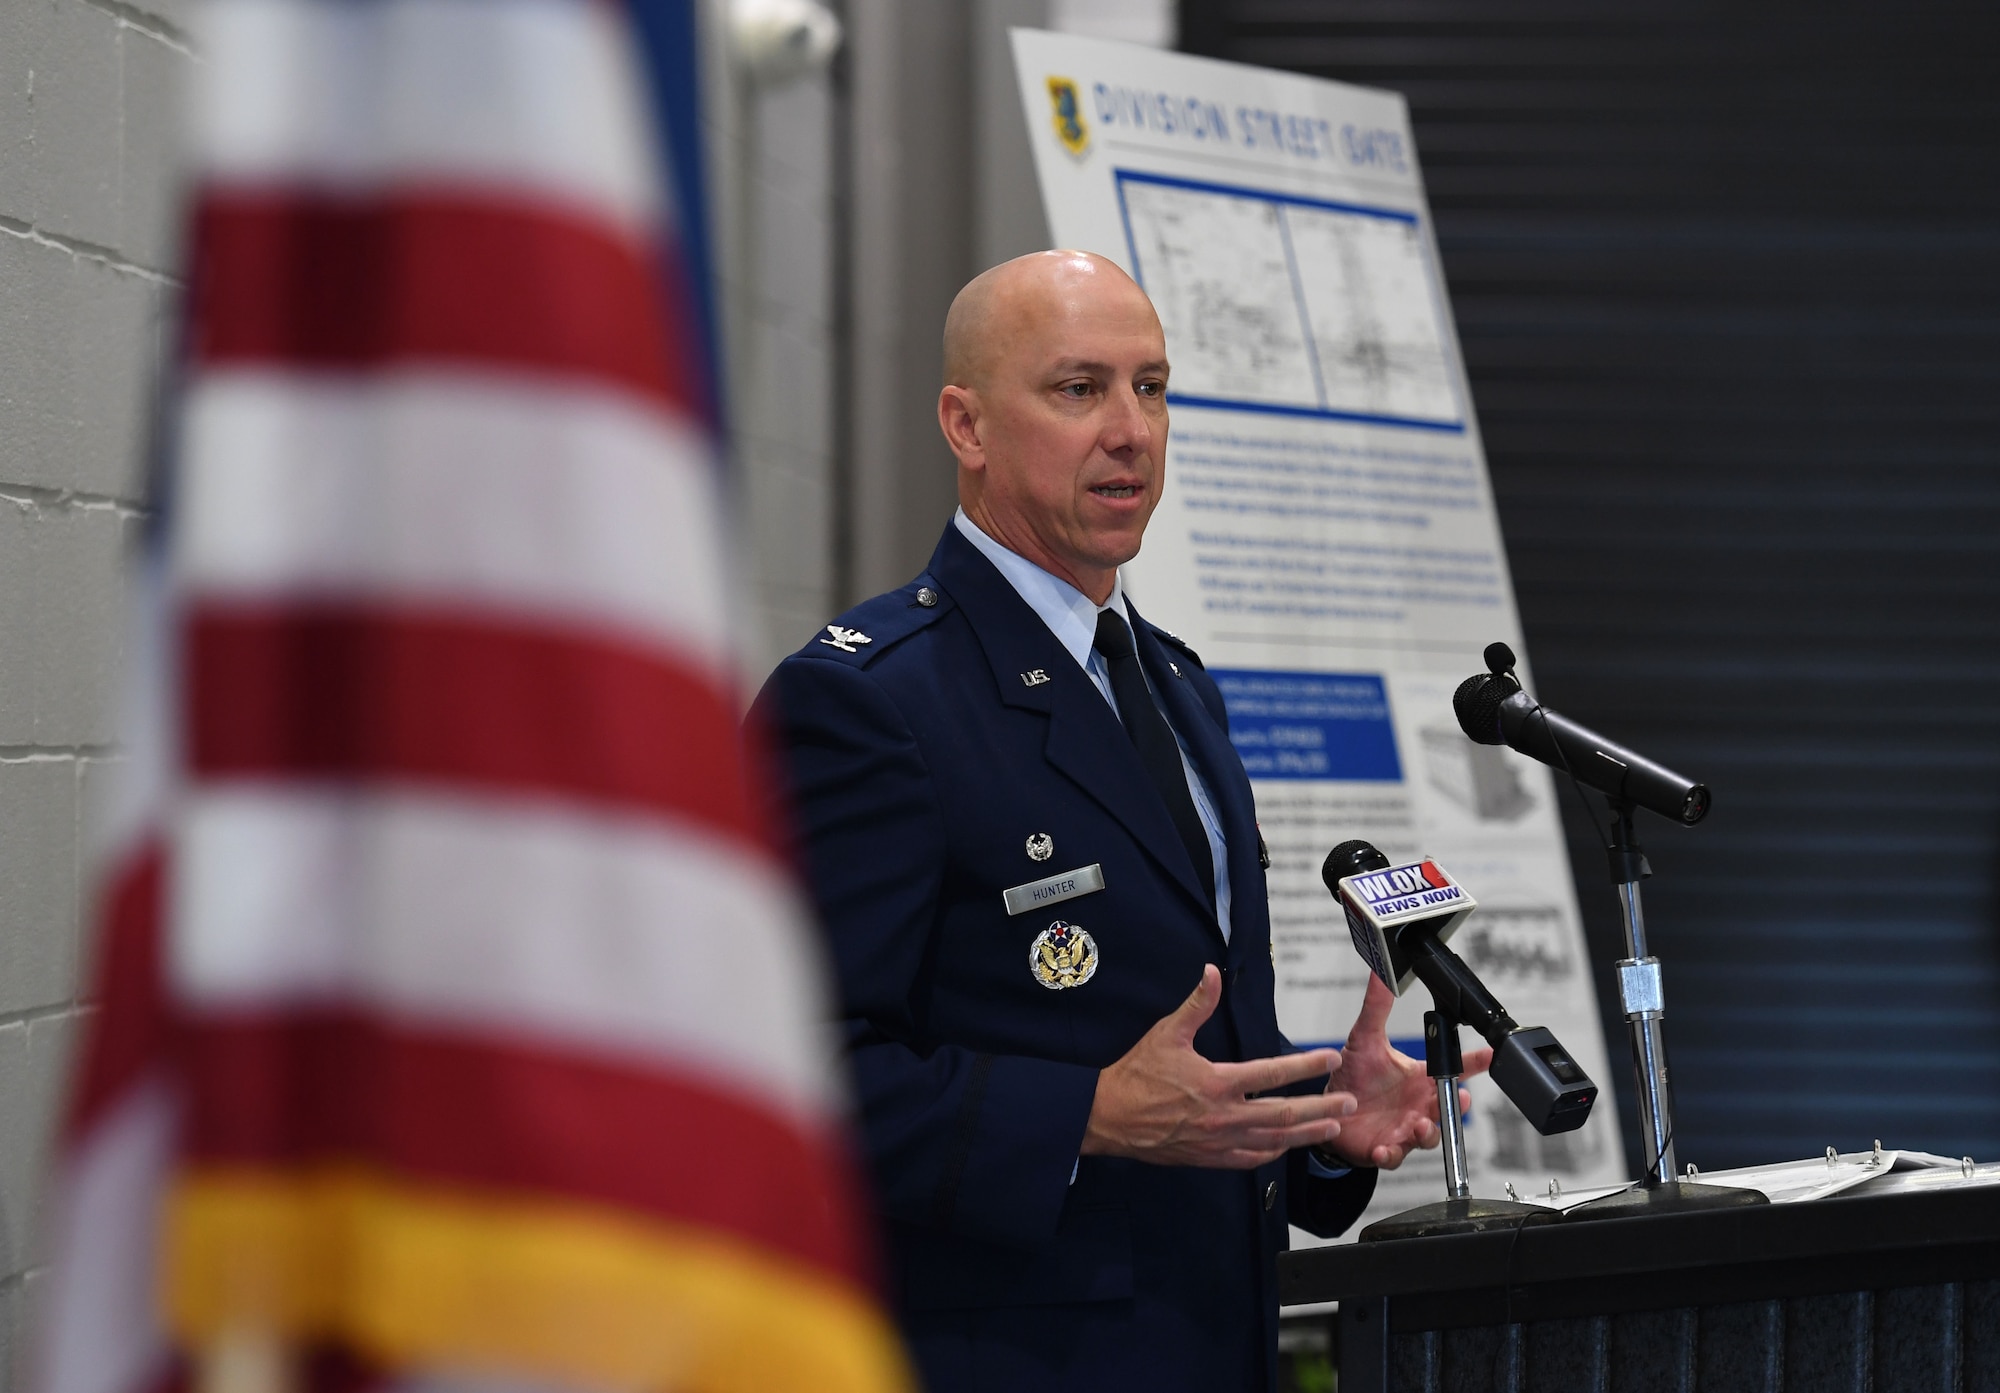 U.S. Air Force Col. William Hunter, 81st Training Wing commander, delivers remarks during the Division Street Gate Ribbon Cutting Ceremony inside the Commercial Vehicle Inspection Building at Keesler Air Force Base, Mississippi, May 26, 2022. After approximately two years of construction, Keesler's new main gate marks the completion of a multi-sourced and multi-funded project which will enhance force protection and anti-terrorism measures. Keesler partnered with the city of Biloxi, along with state and federal planners, to align the primary entrance at Division Street. (U.S. Air Force photo by Kemberly Groue)